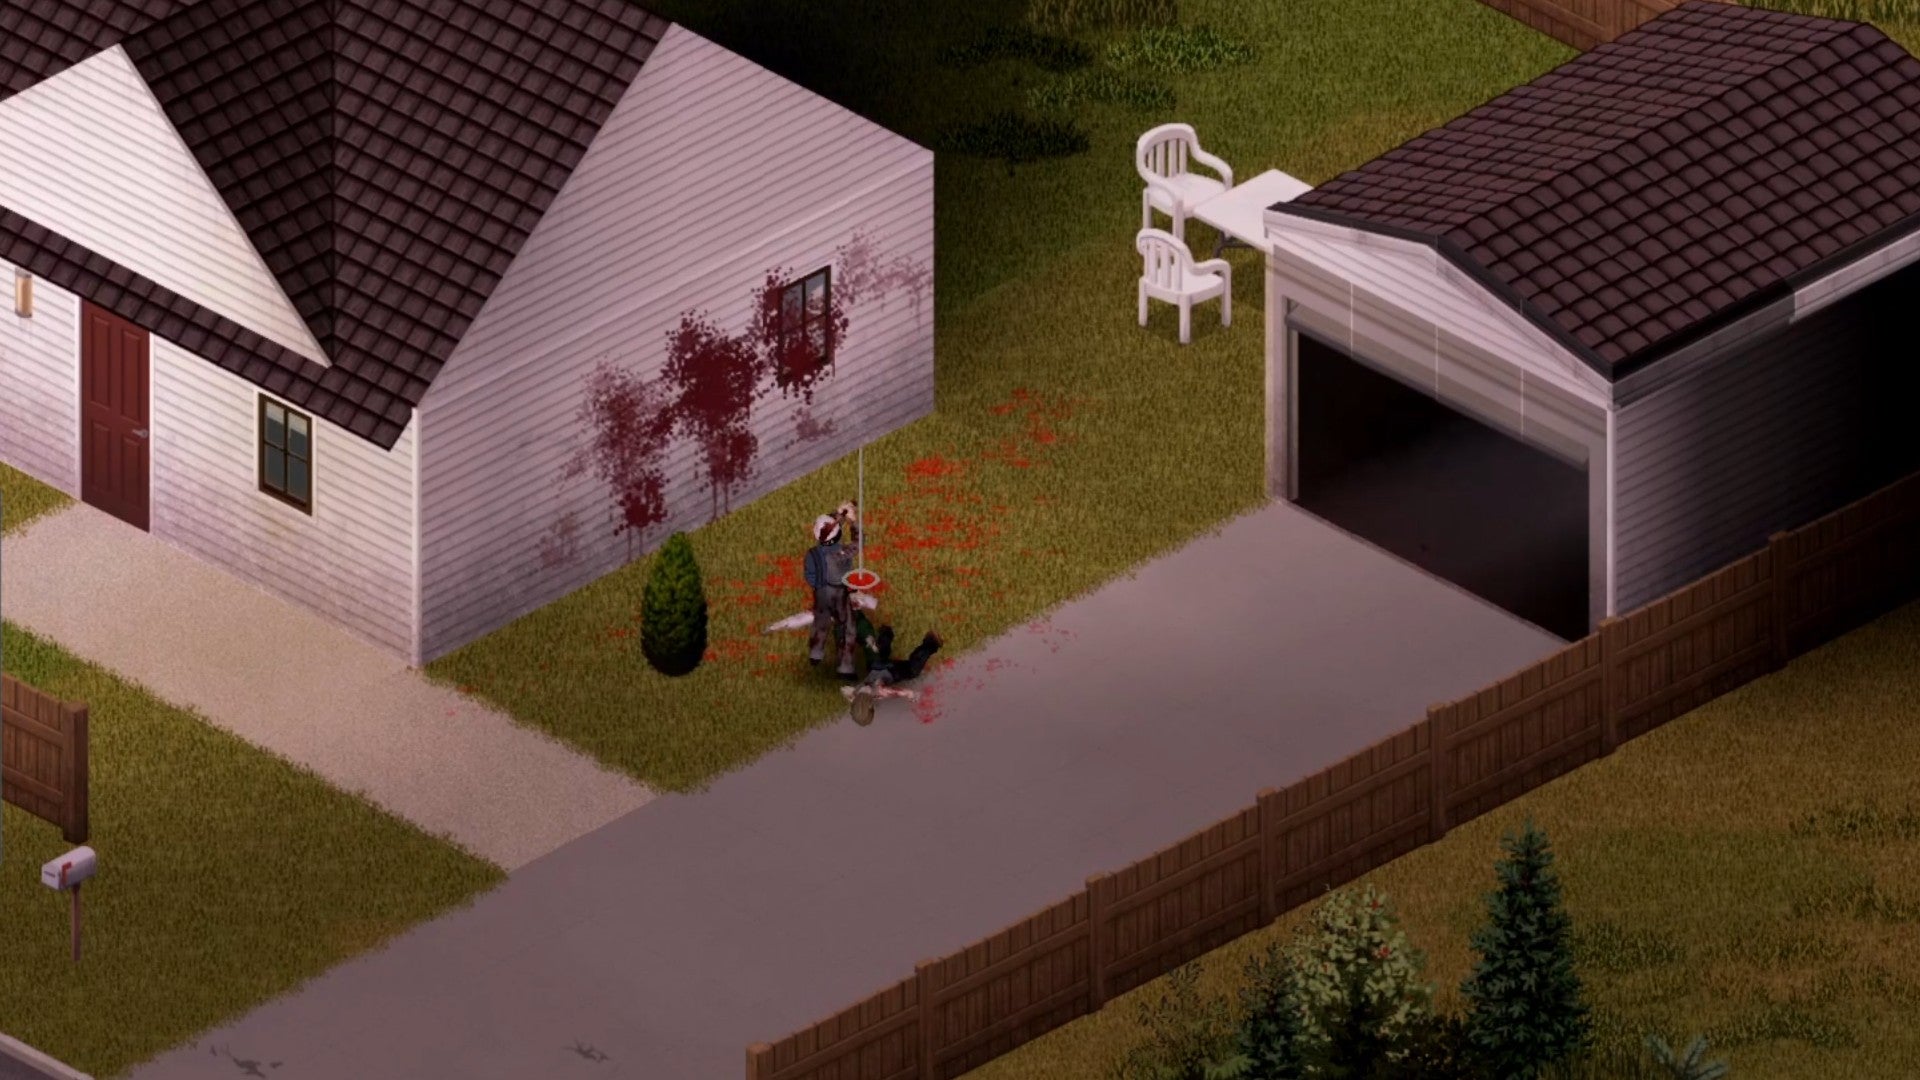 Project Zomboid character wearing police armour fighting zombies with an axe